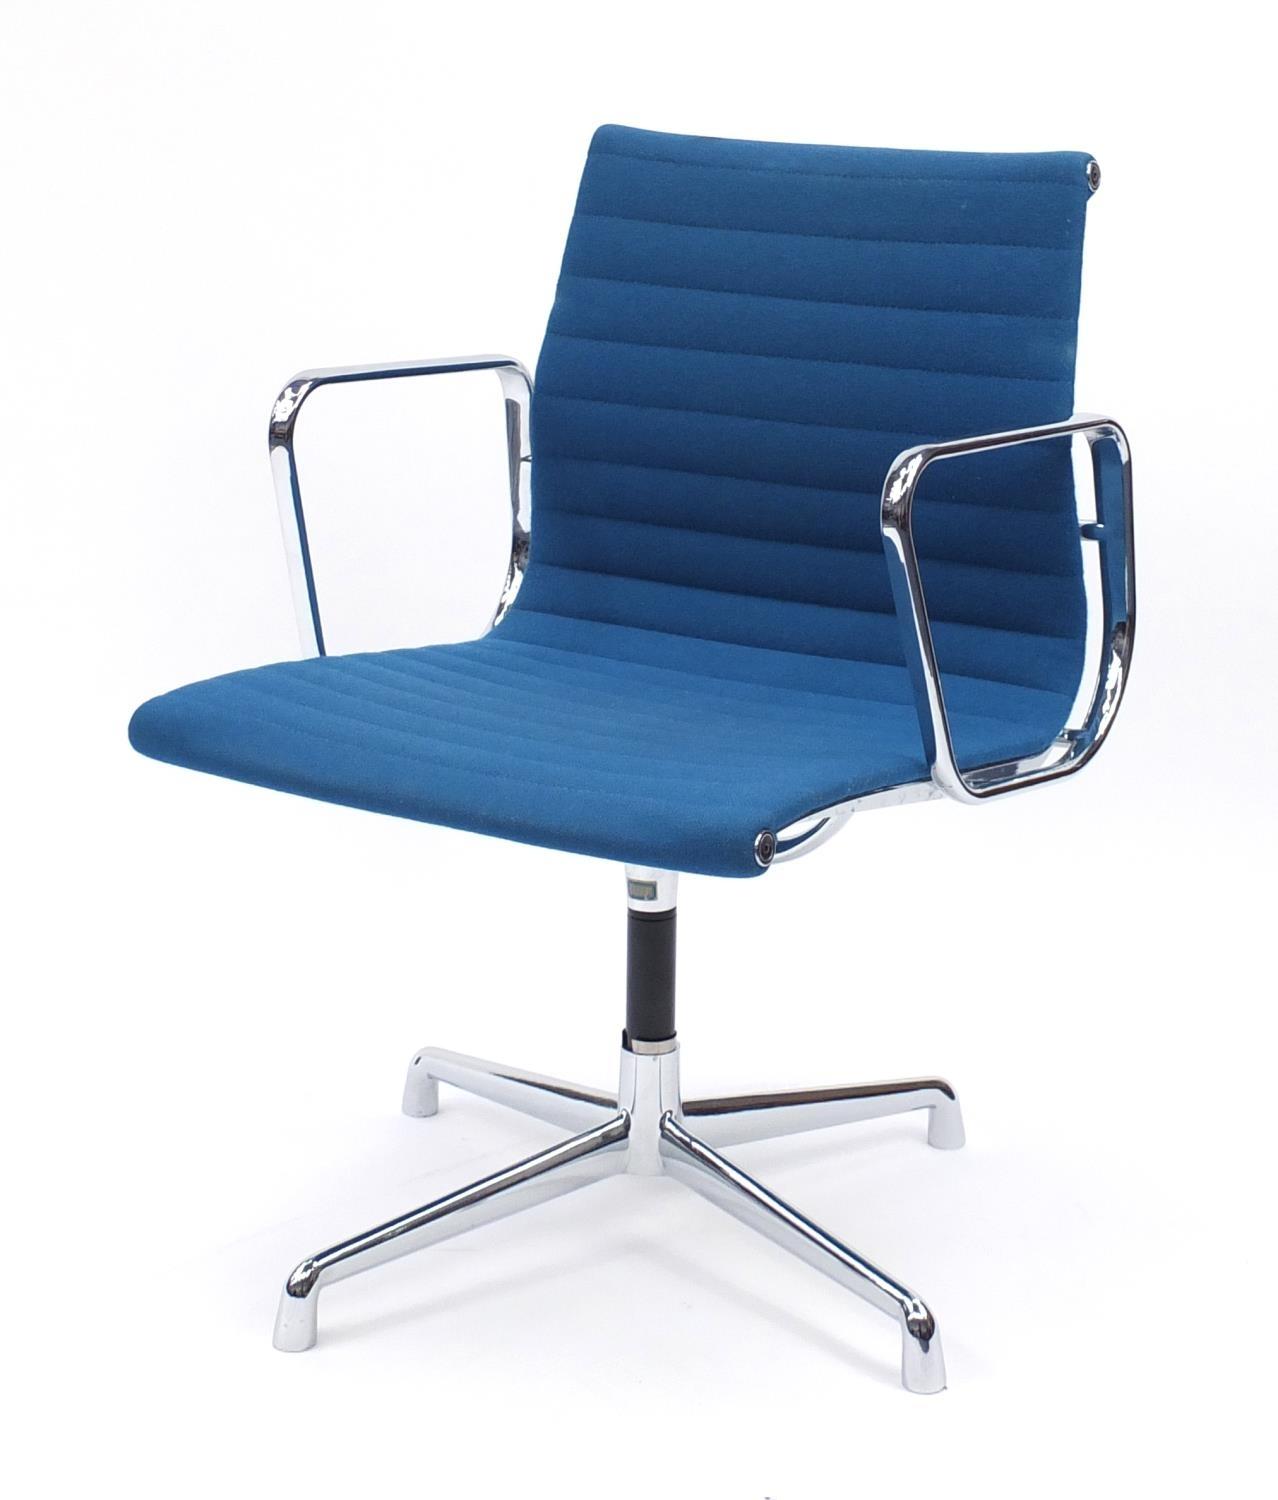 Charles and Ray Eames EA107 design desk chair with turquoise upholstery, 82cm high :For Further